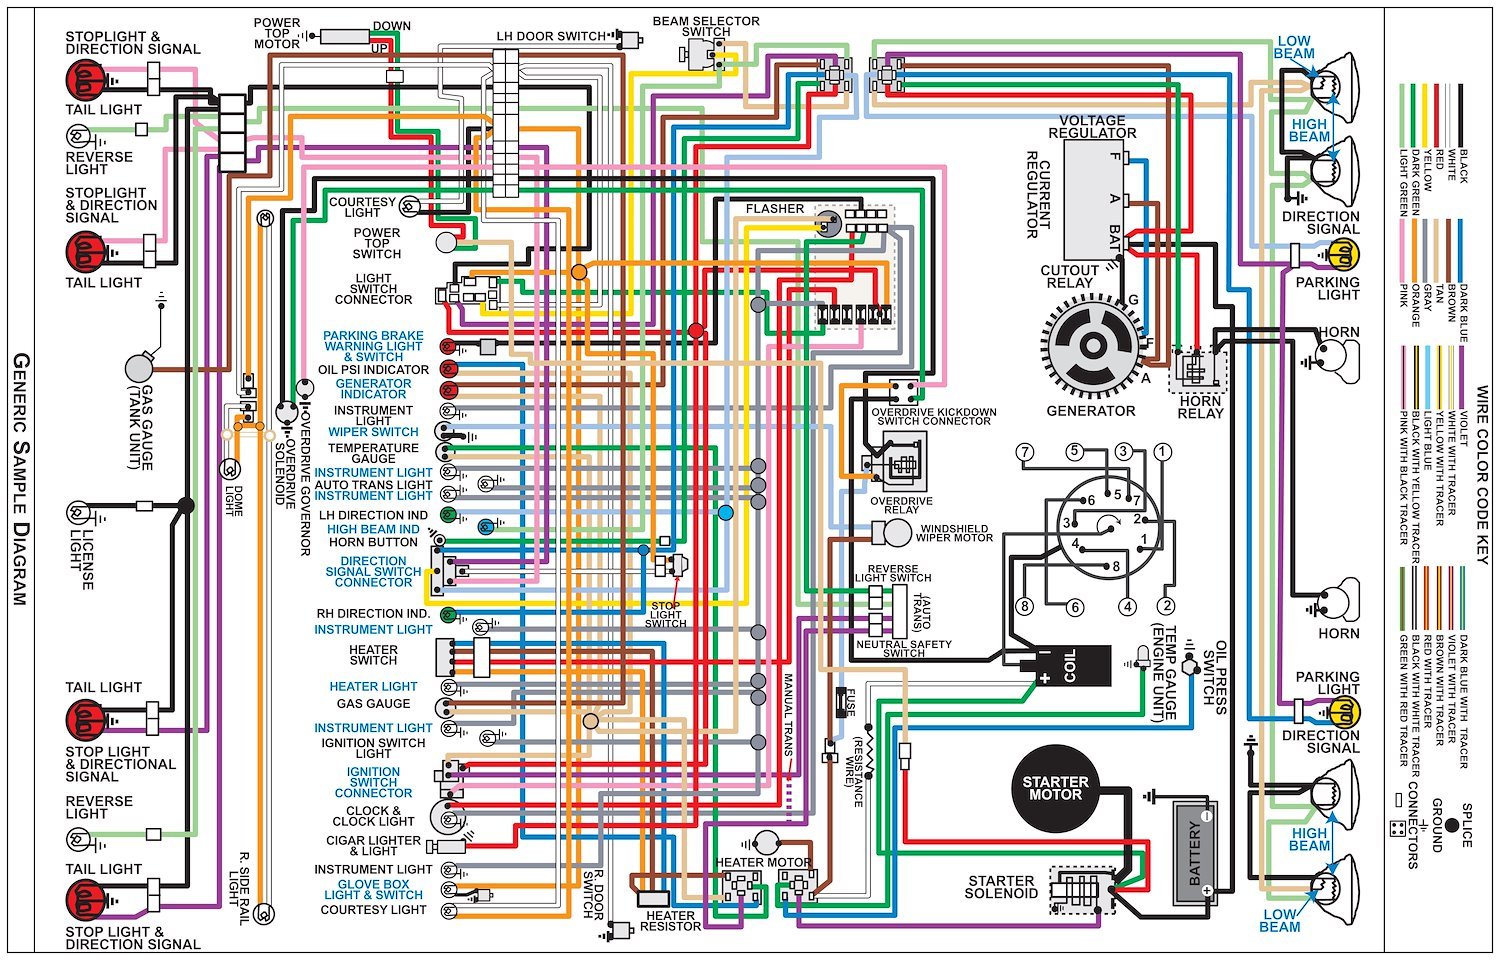 Jegs 19298 Wiring Diagram 1978 Chevy